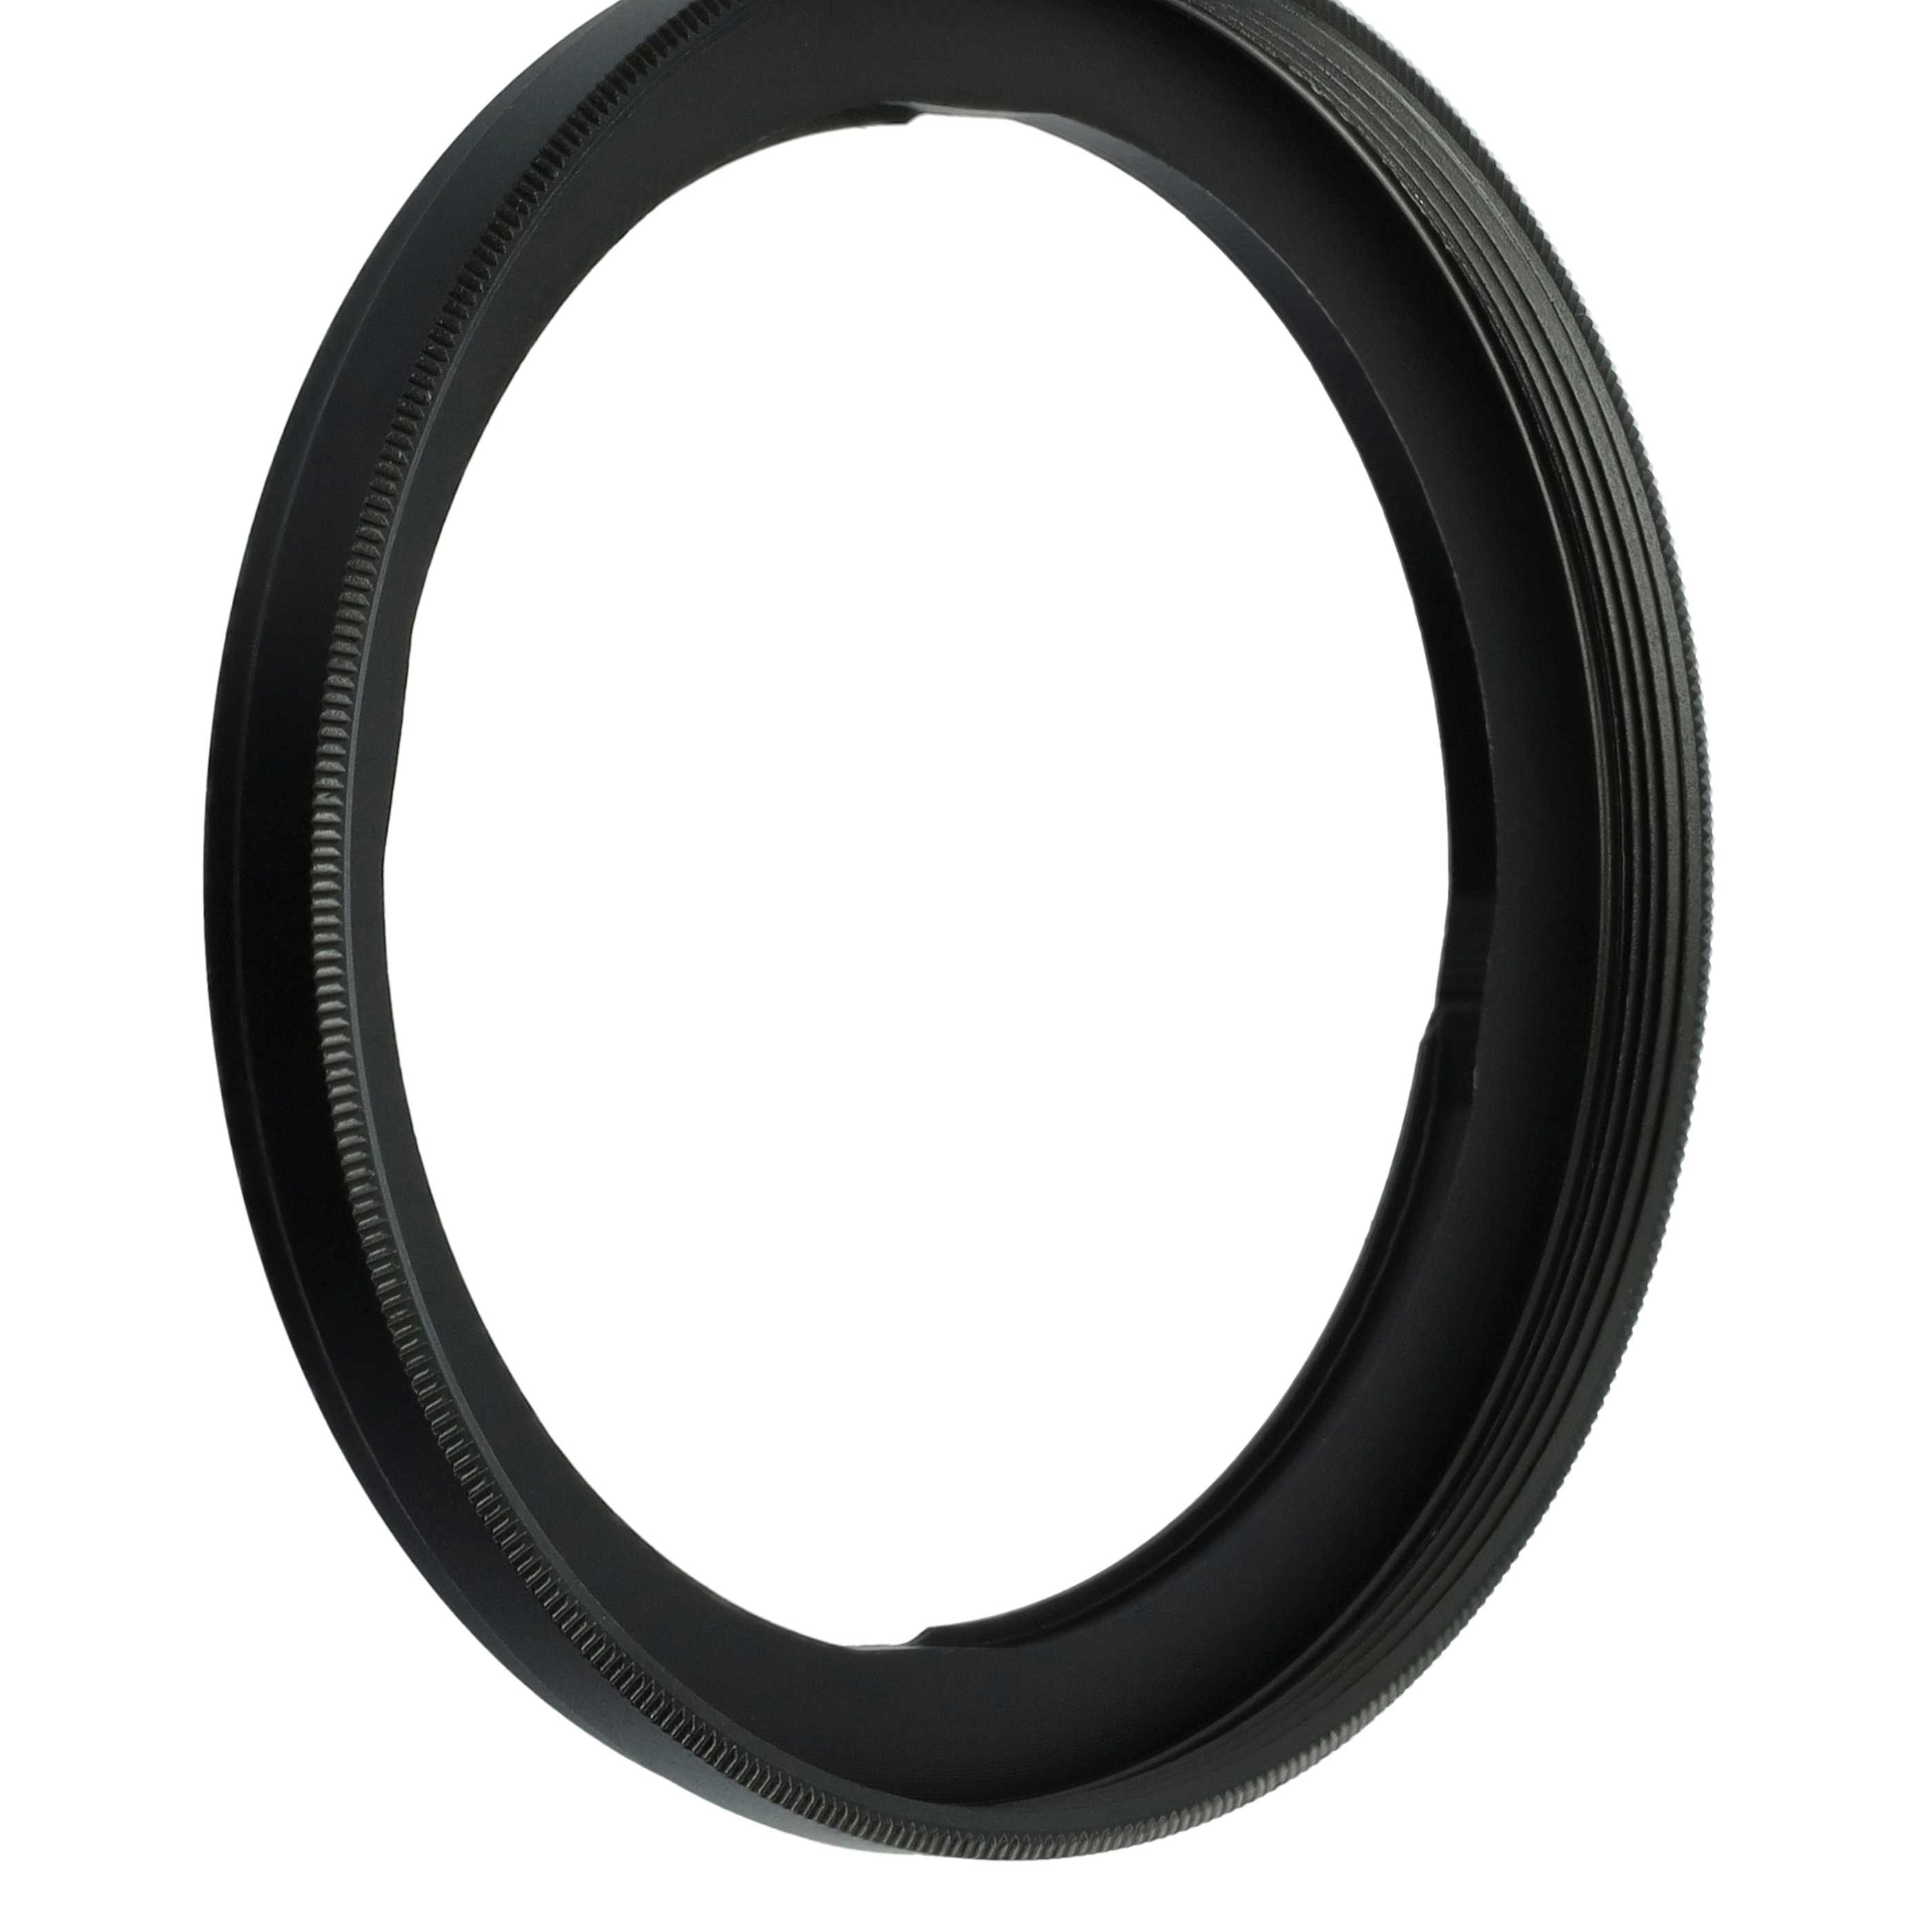 Filter Adapter replaces Canon FA-DC58C for Camera Lens